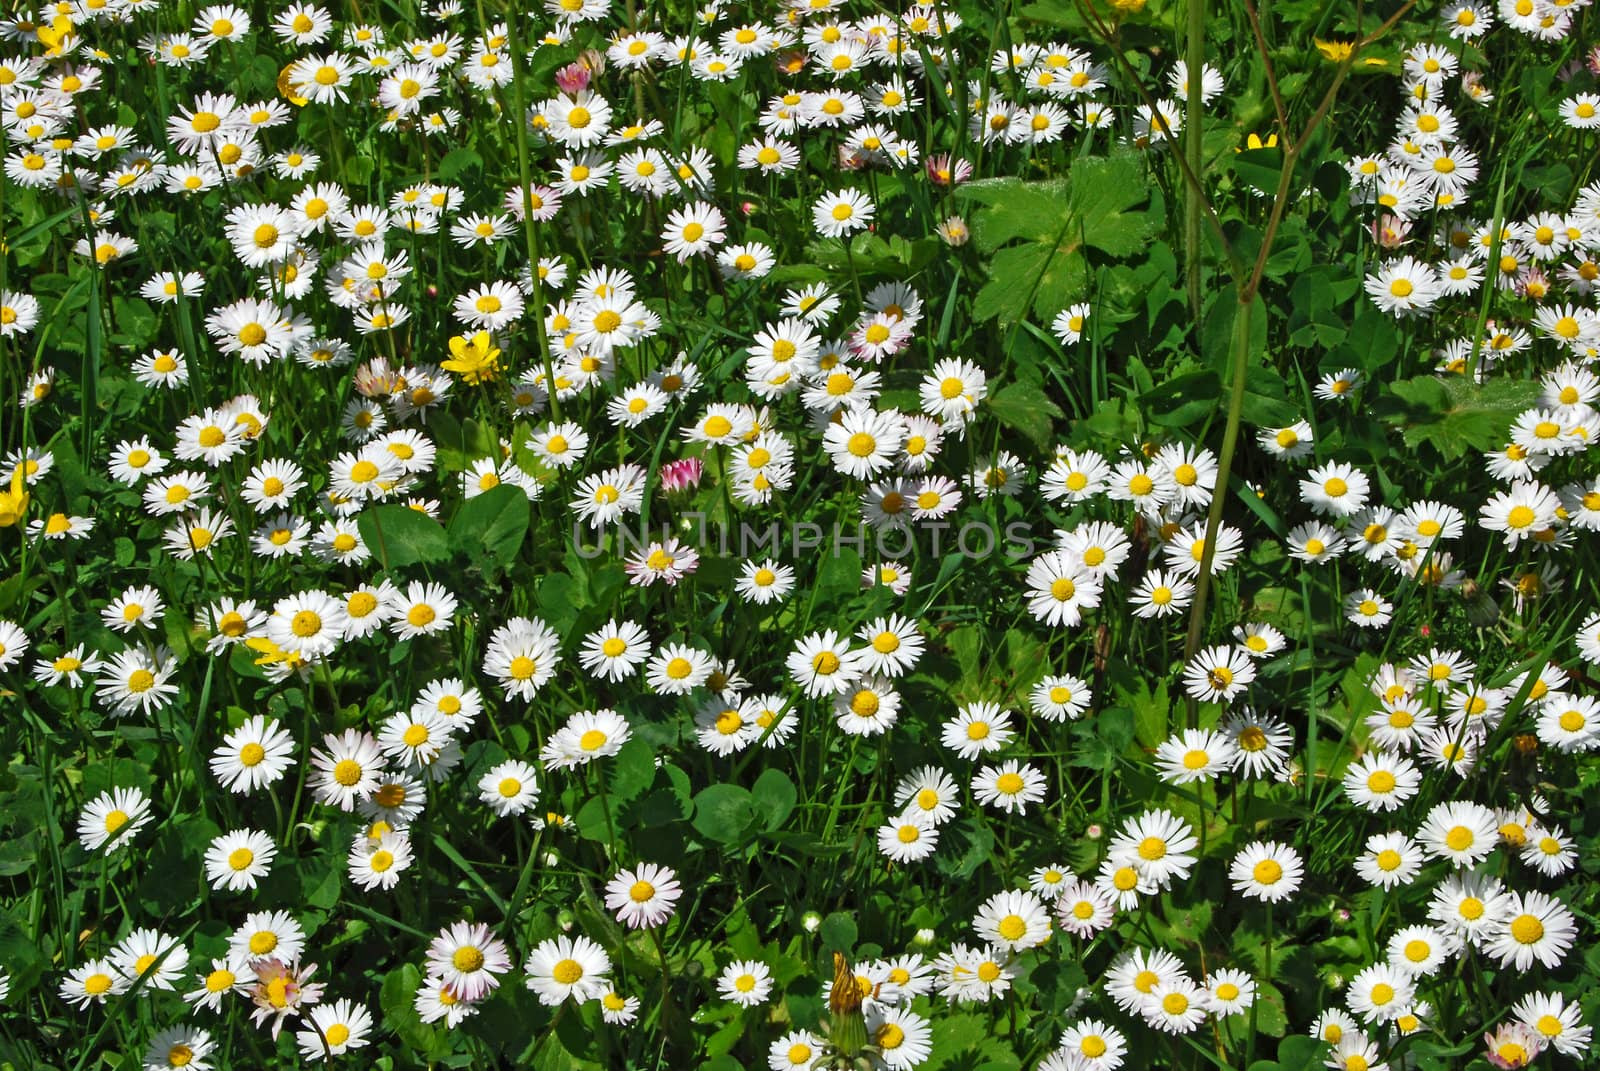 Daisies and clovers on country meadow as background